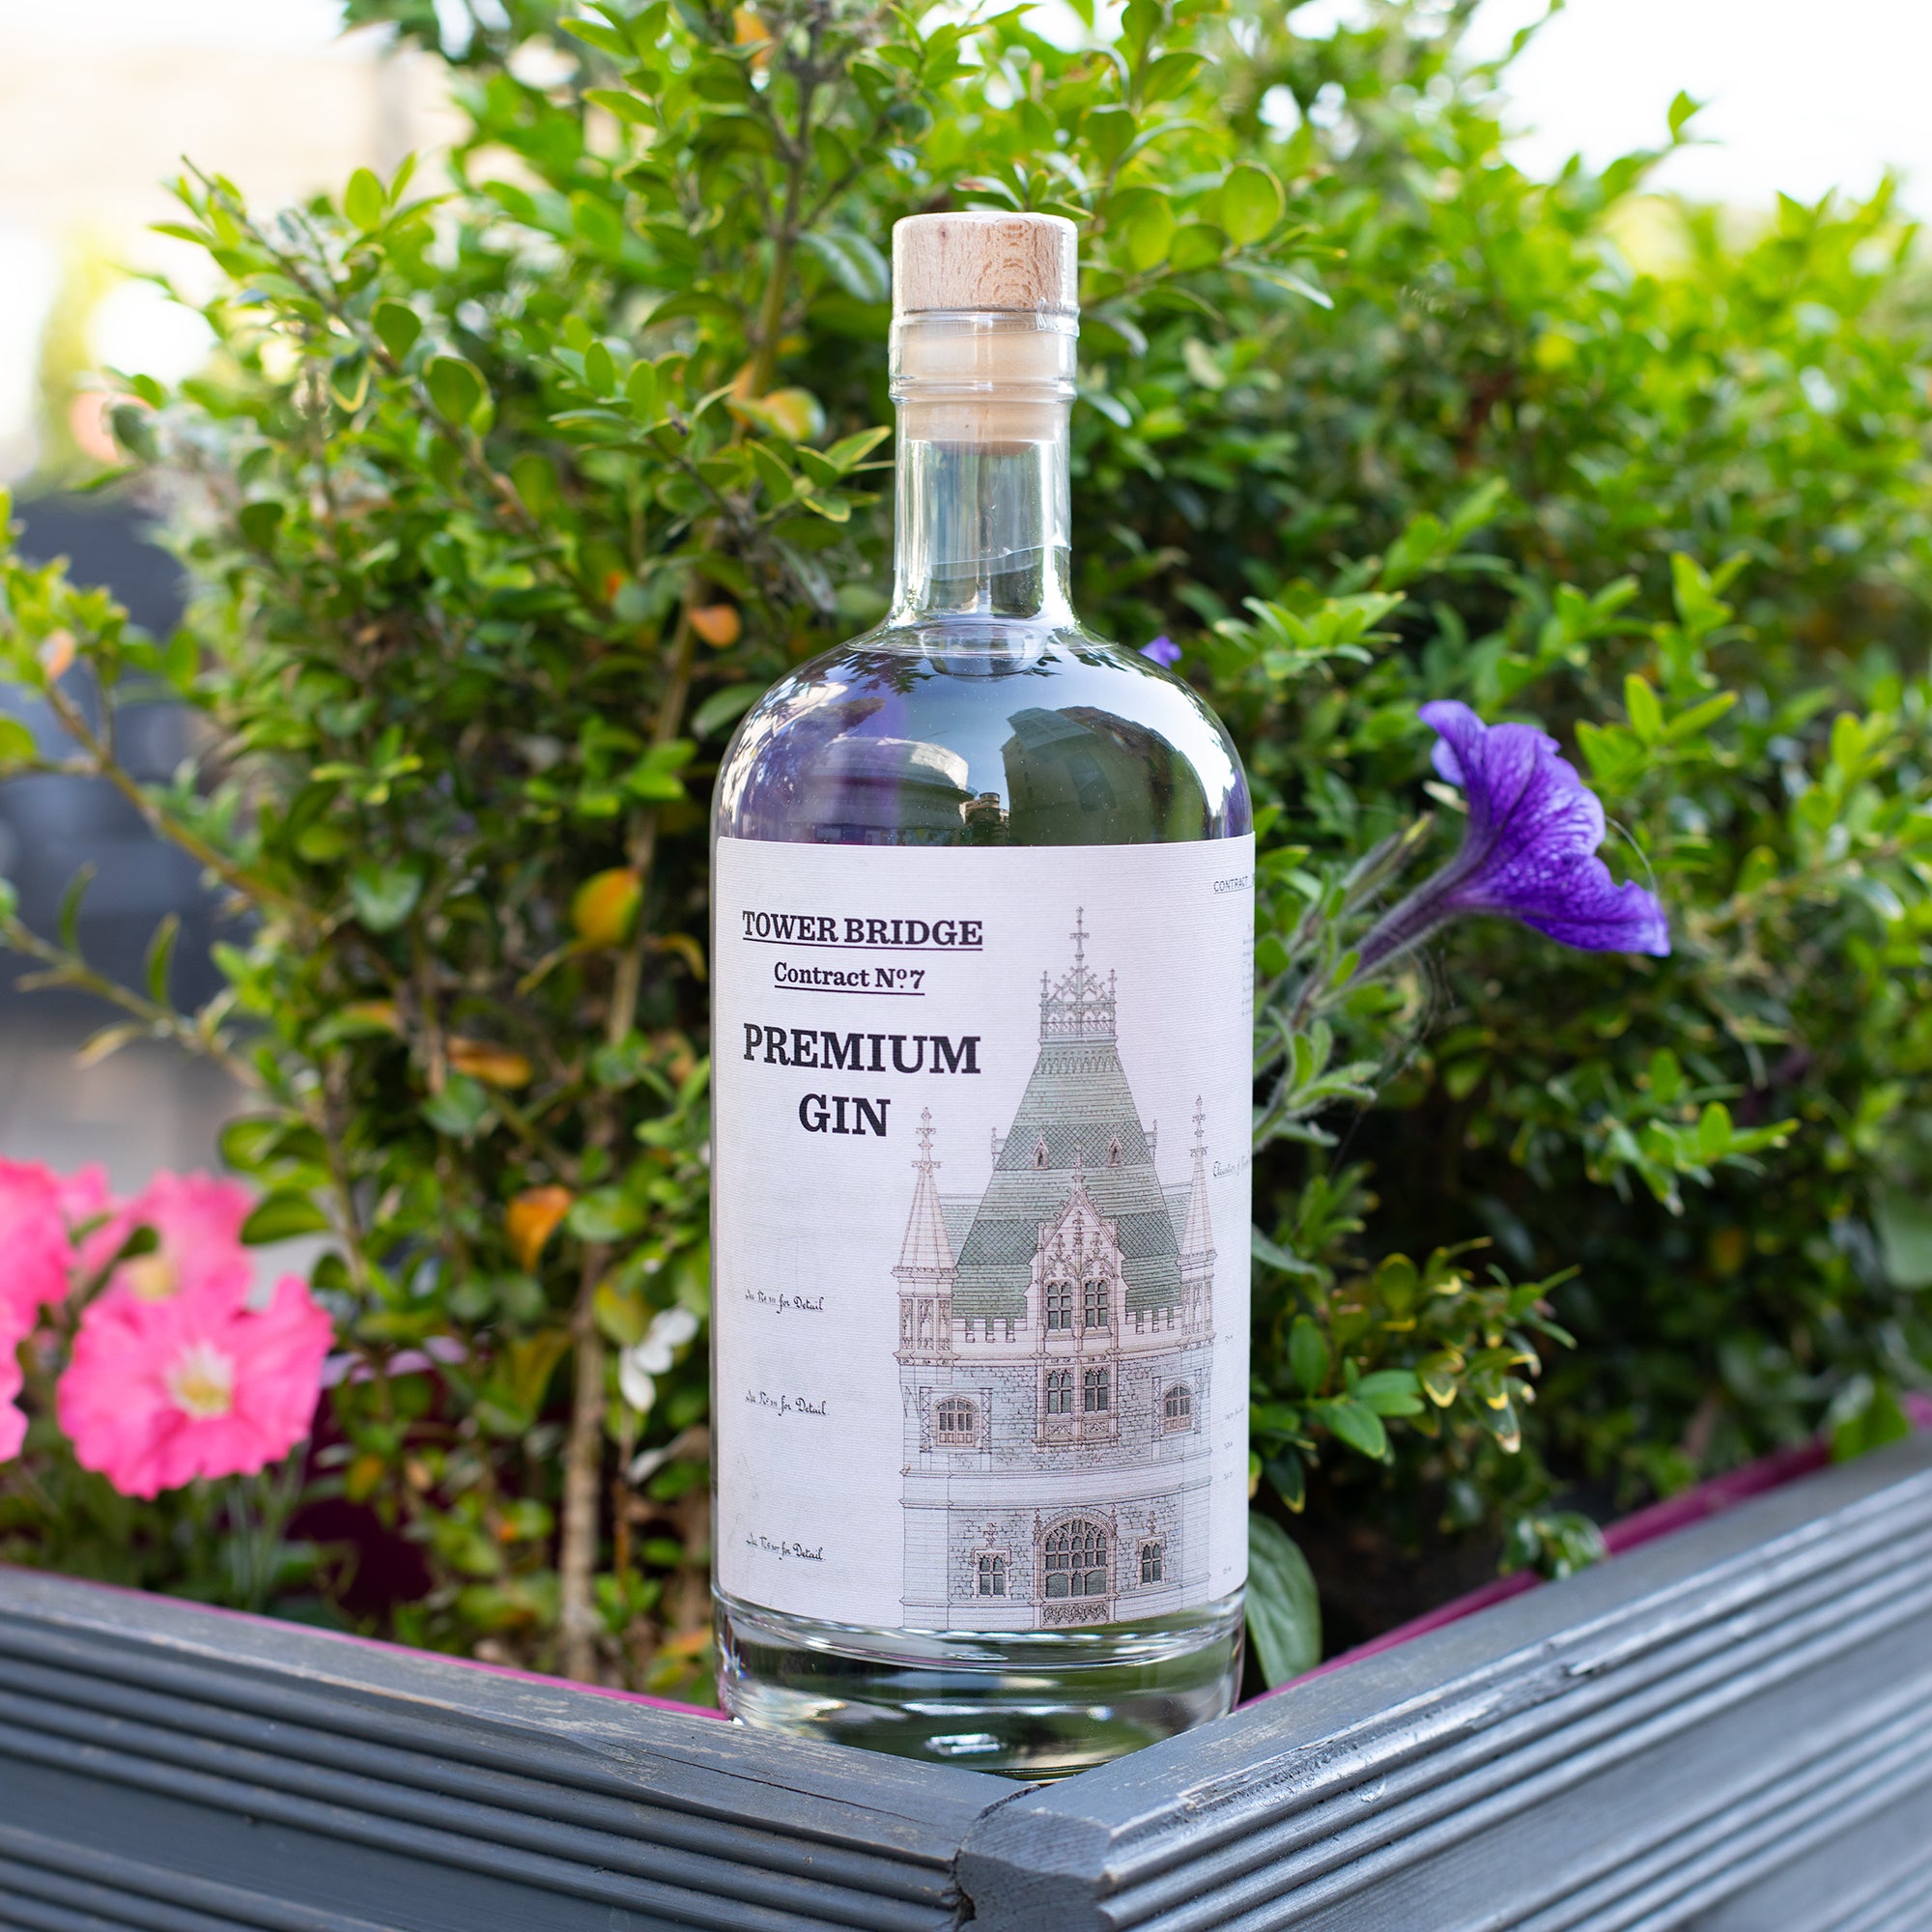 Tower Bridge Contract No. 7 Premium Gin in front of flowers